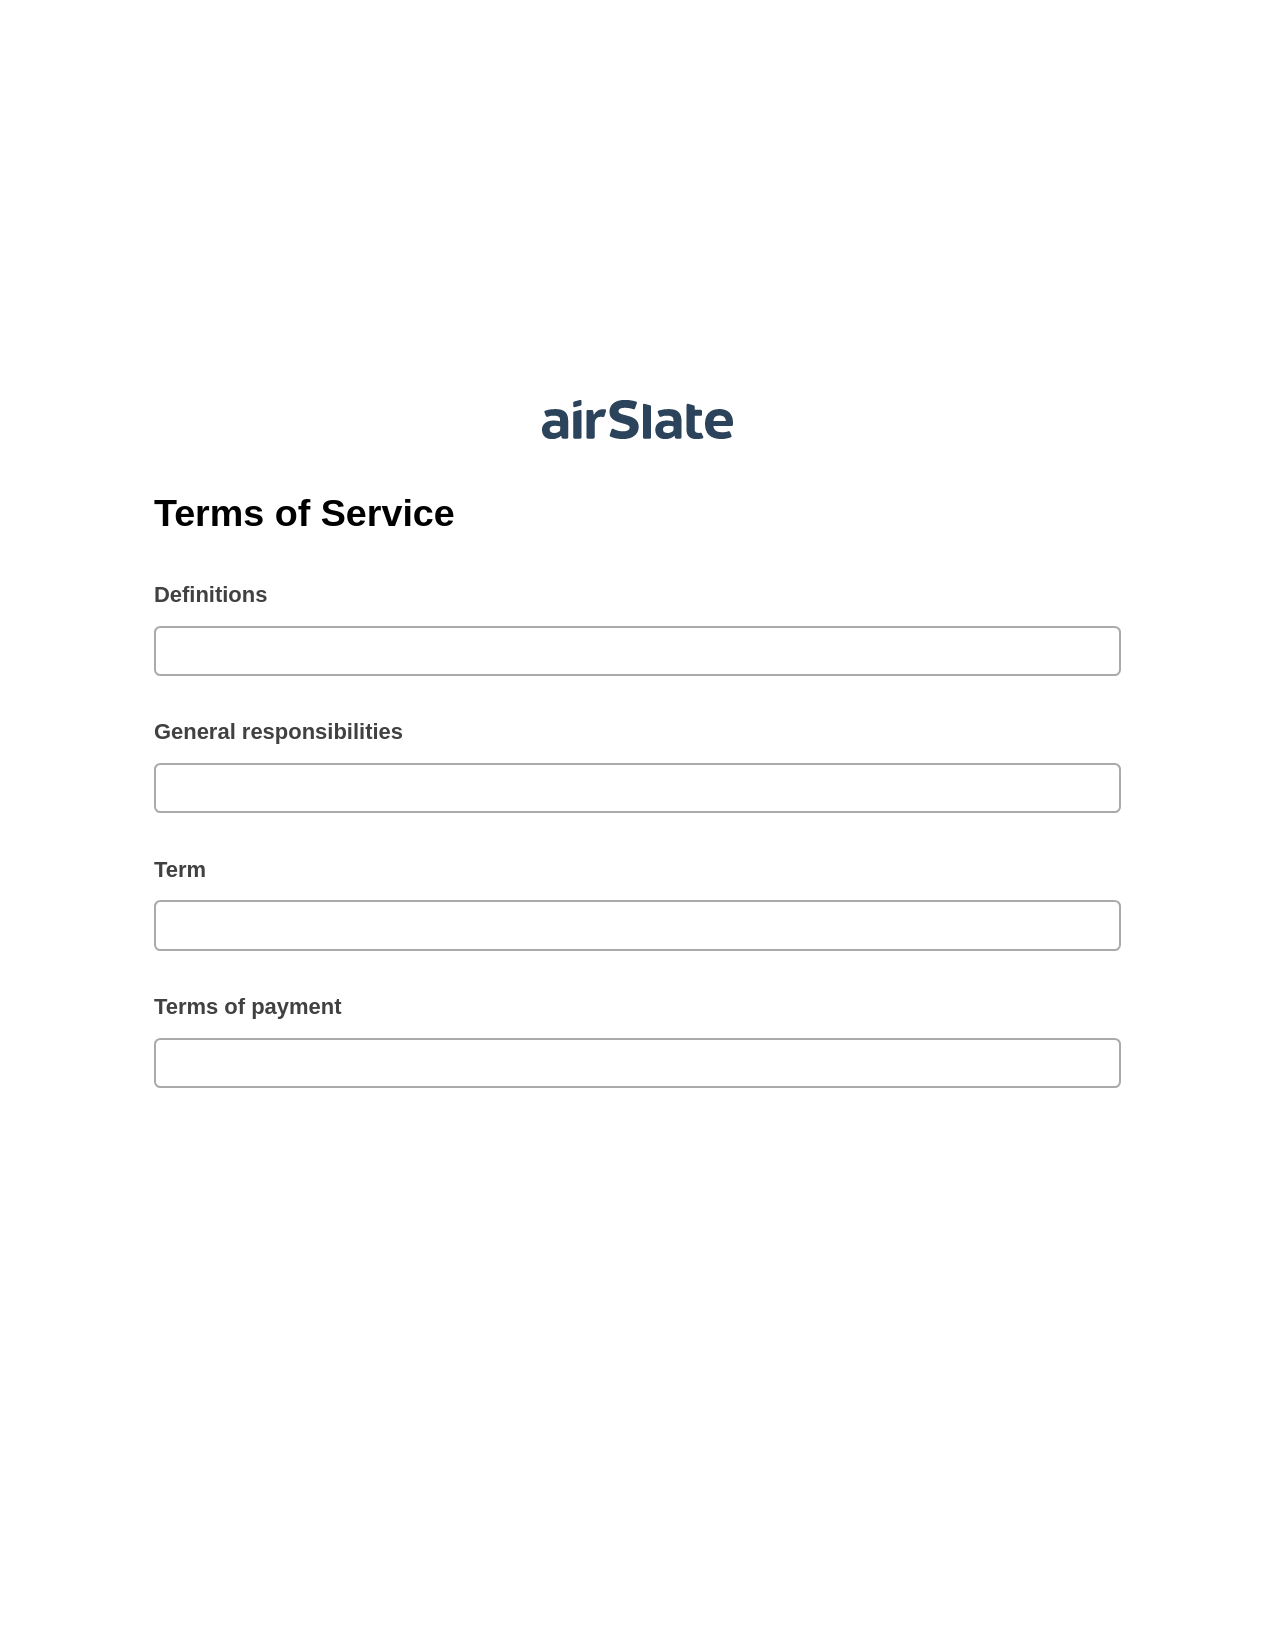 Terms of Service Pre-fill Slate from Microsoft Dynamics 365 Records Bot, 1Create Slate every Google Sheet Update Bot, Archive to SharePoint Folder Bot